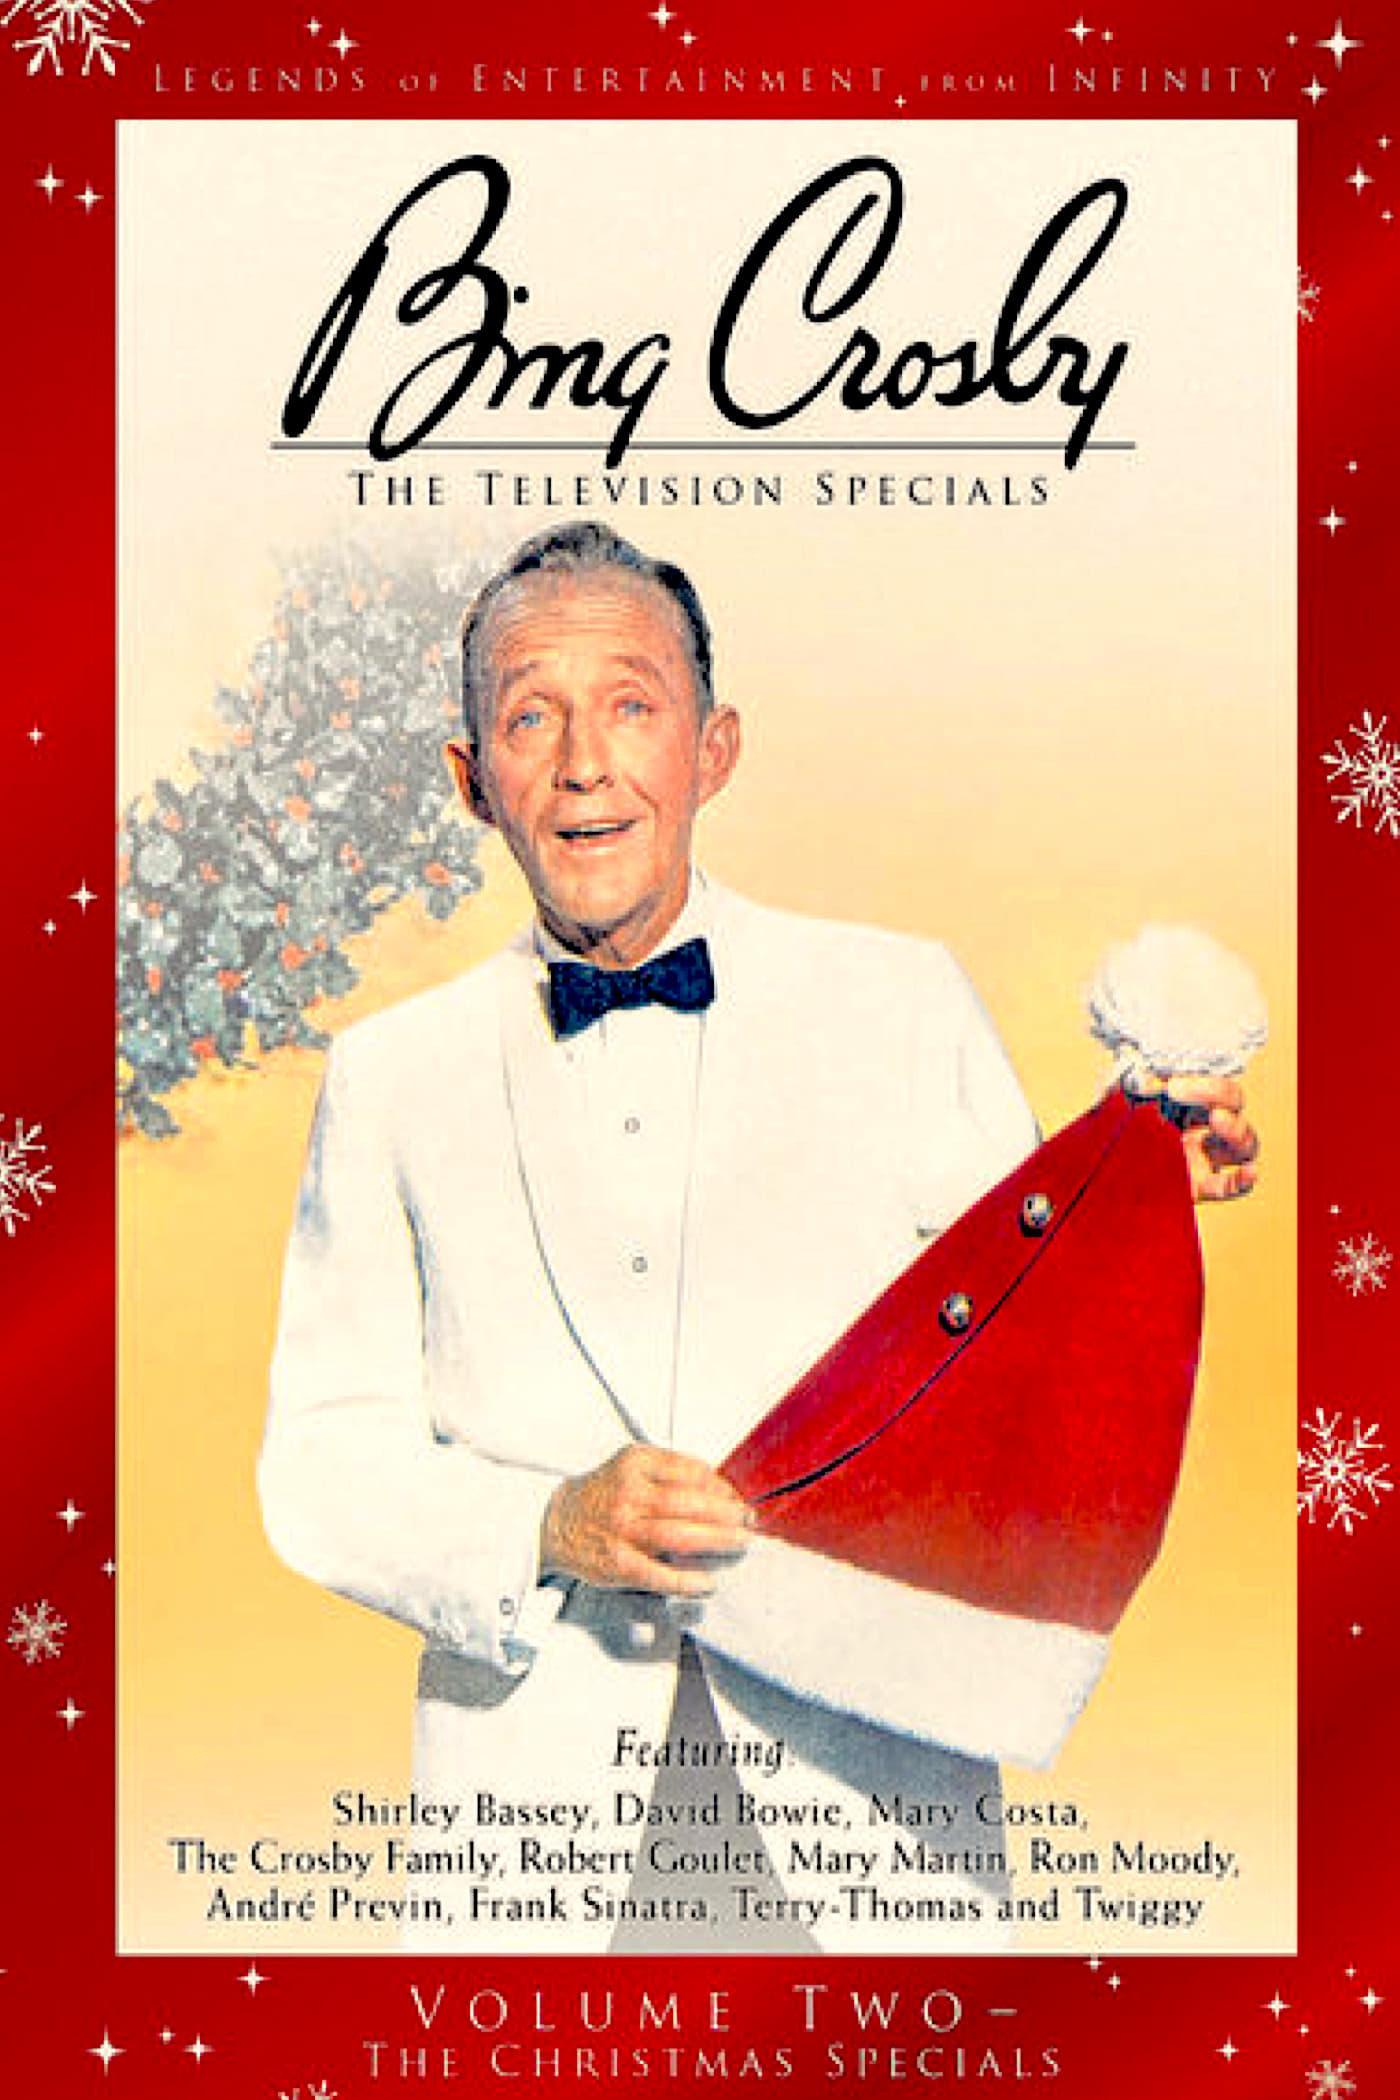 Bing Crosby: The Television Specials Volume 2 – The Christmas Specials poster